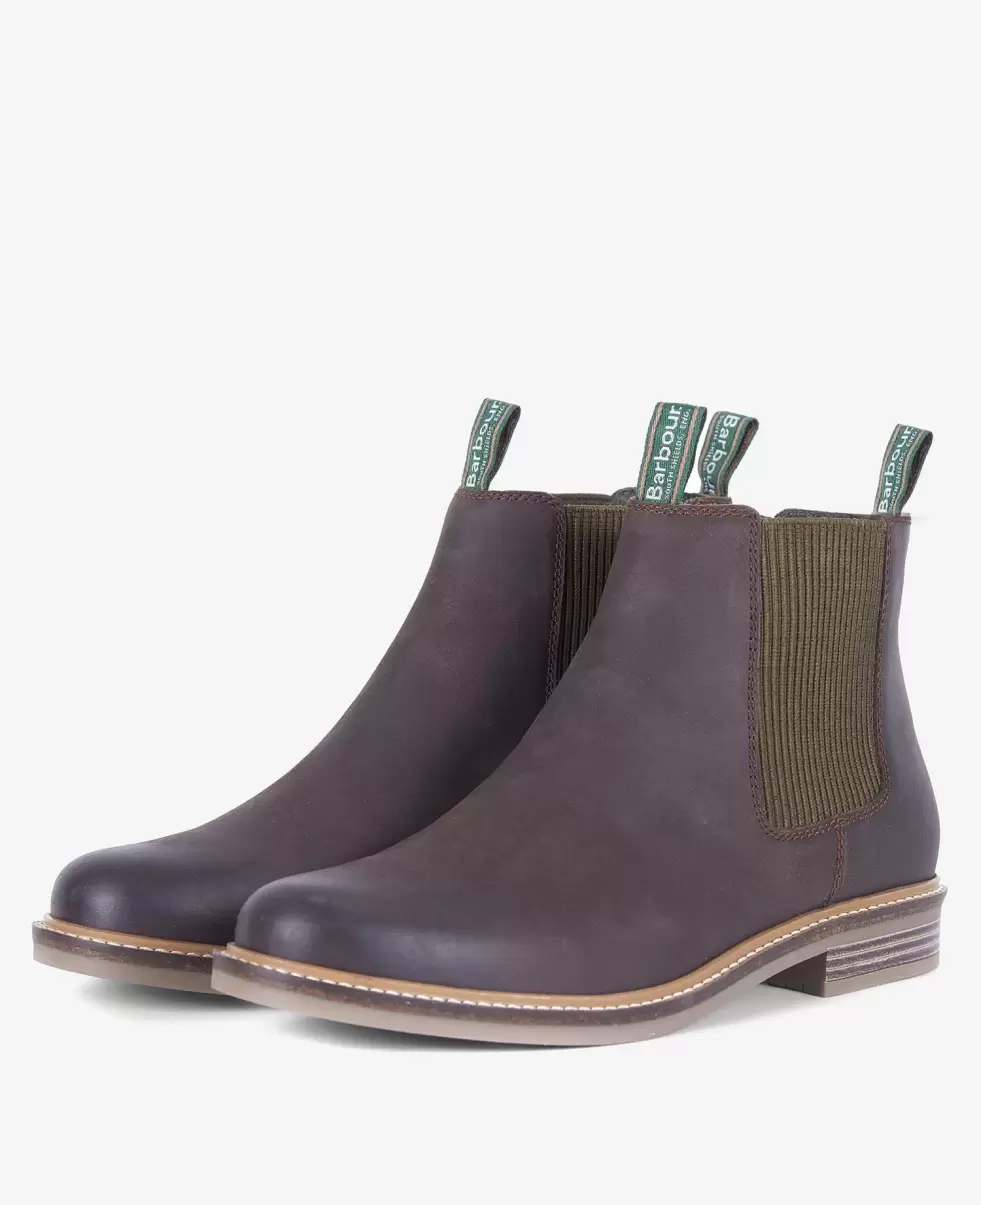 Men Barbour Farsley Chelsea Boots Boots Choco Final Clearance - 1